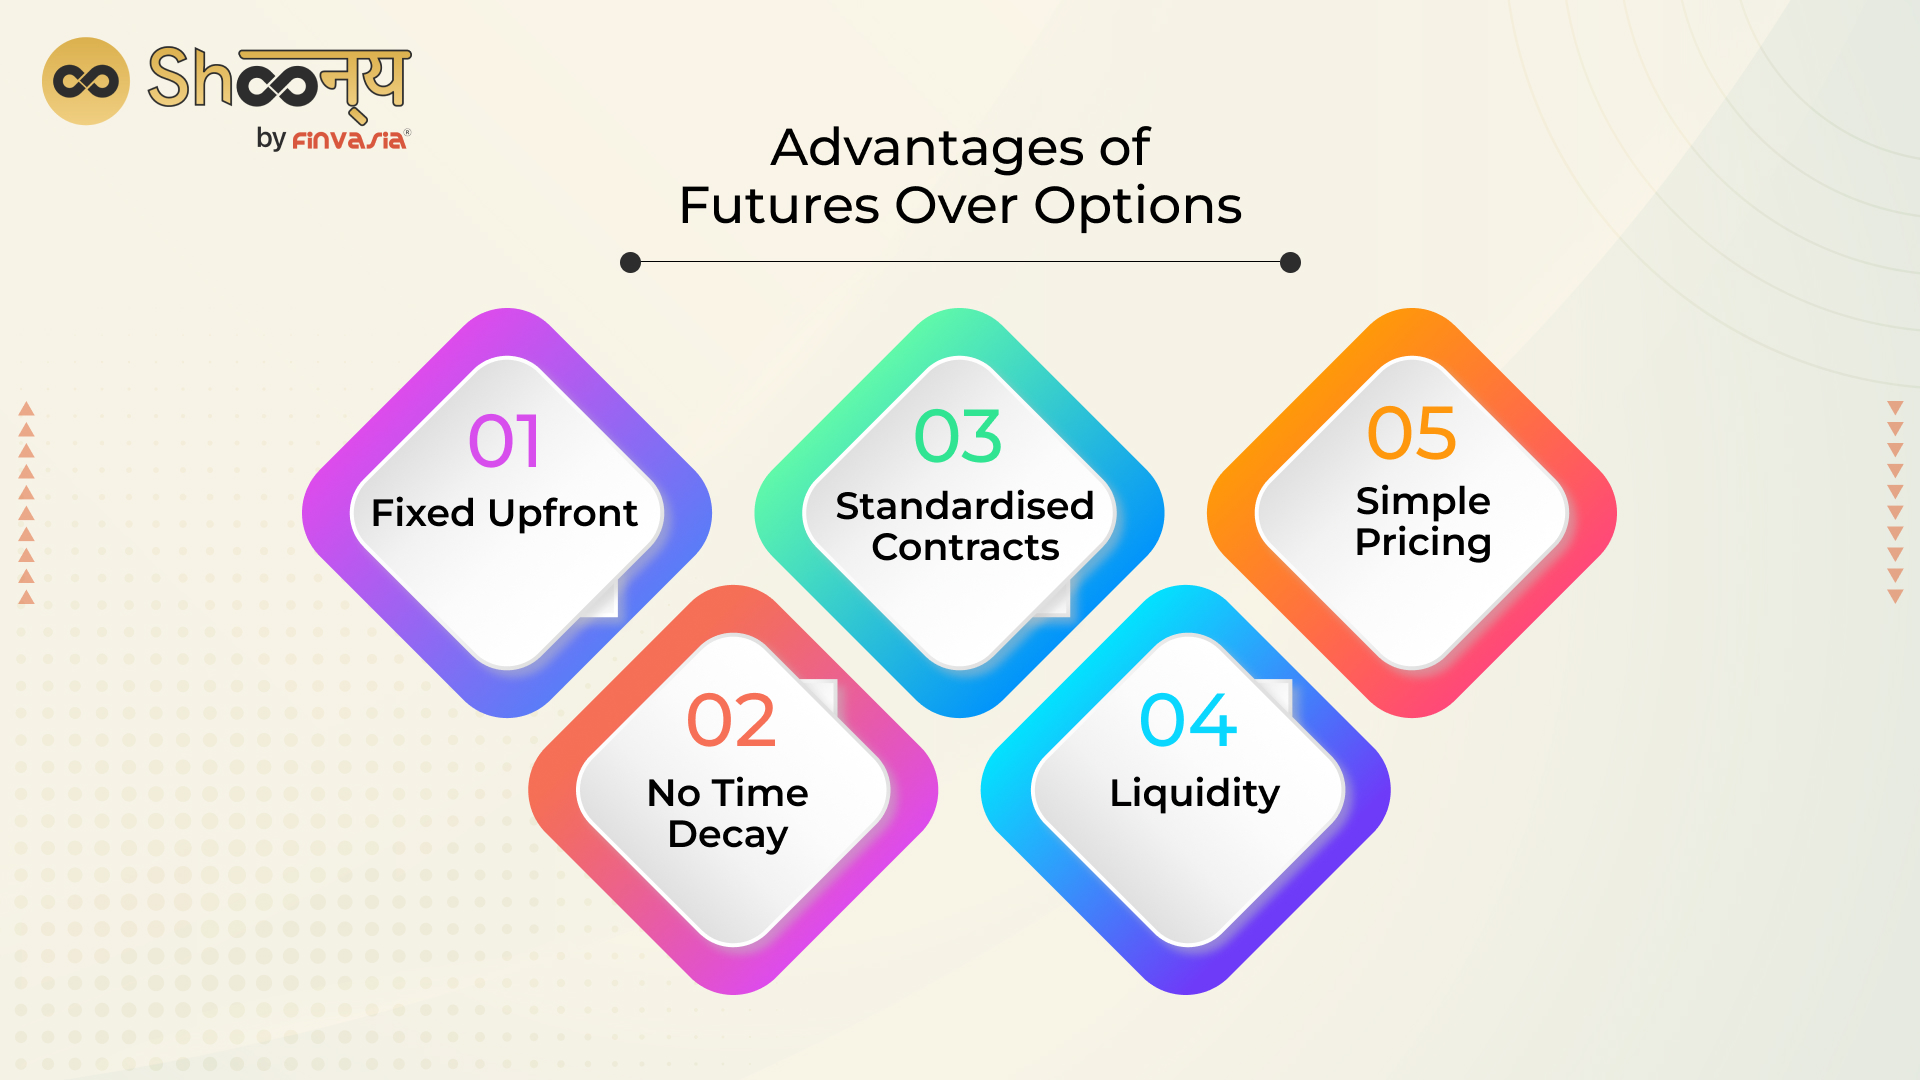 Advantages of Futures Over Options
